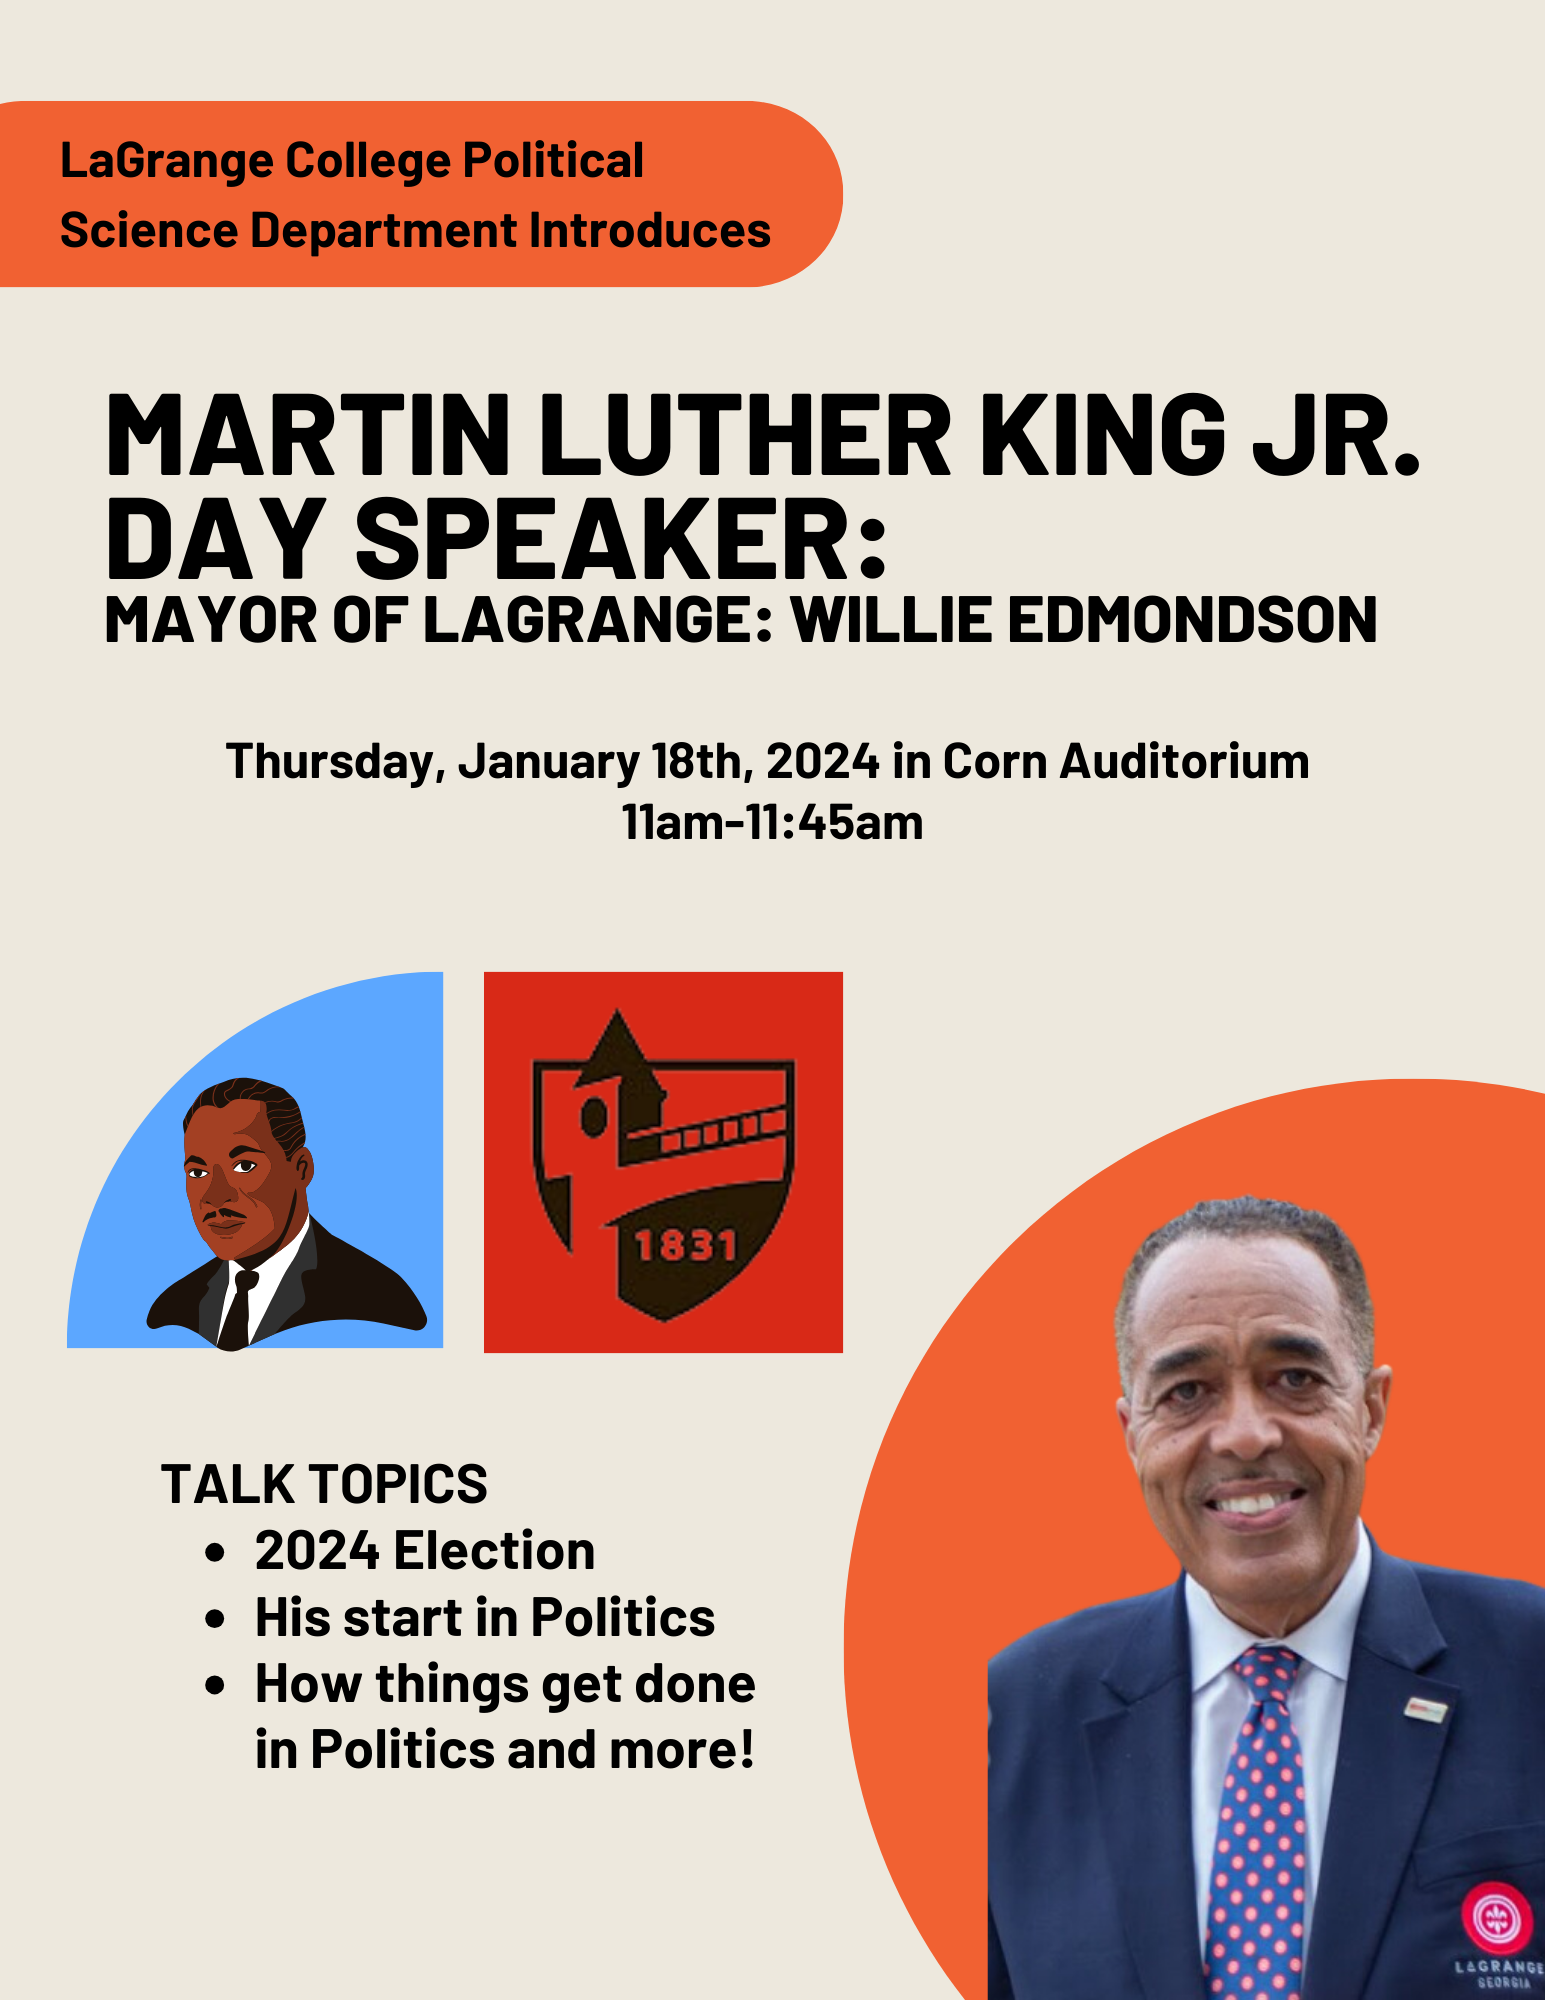 Political Science Department holds Martin Luther King Jr event